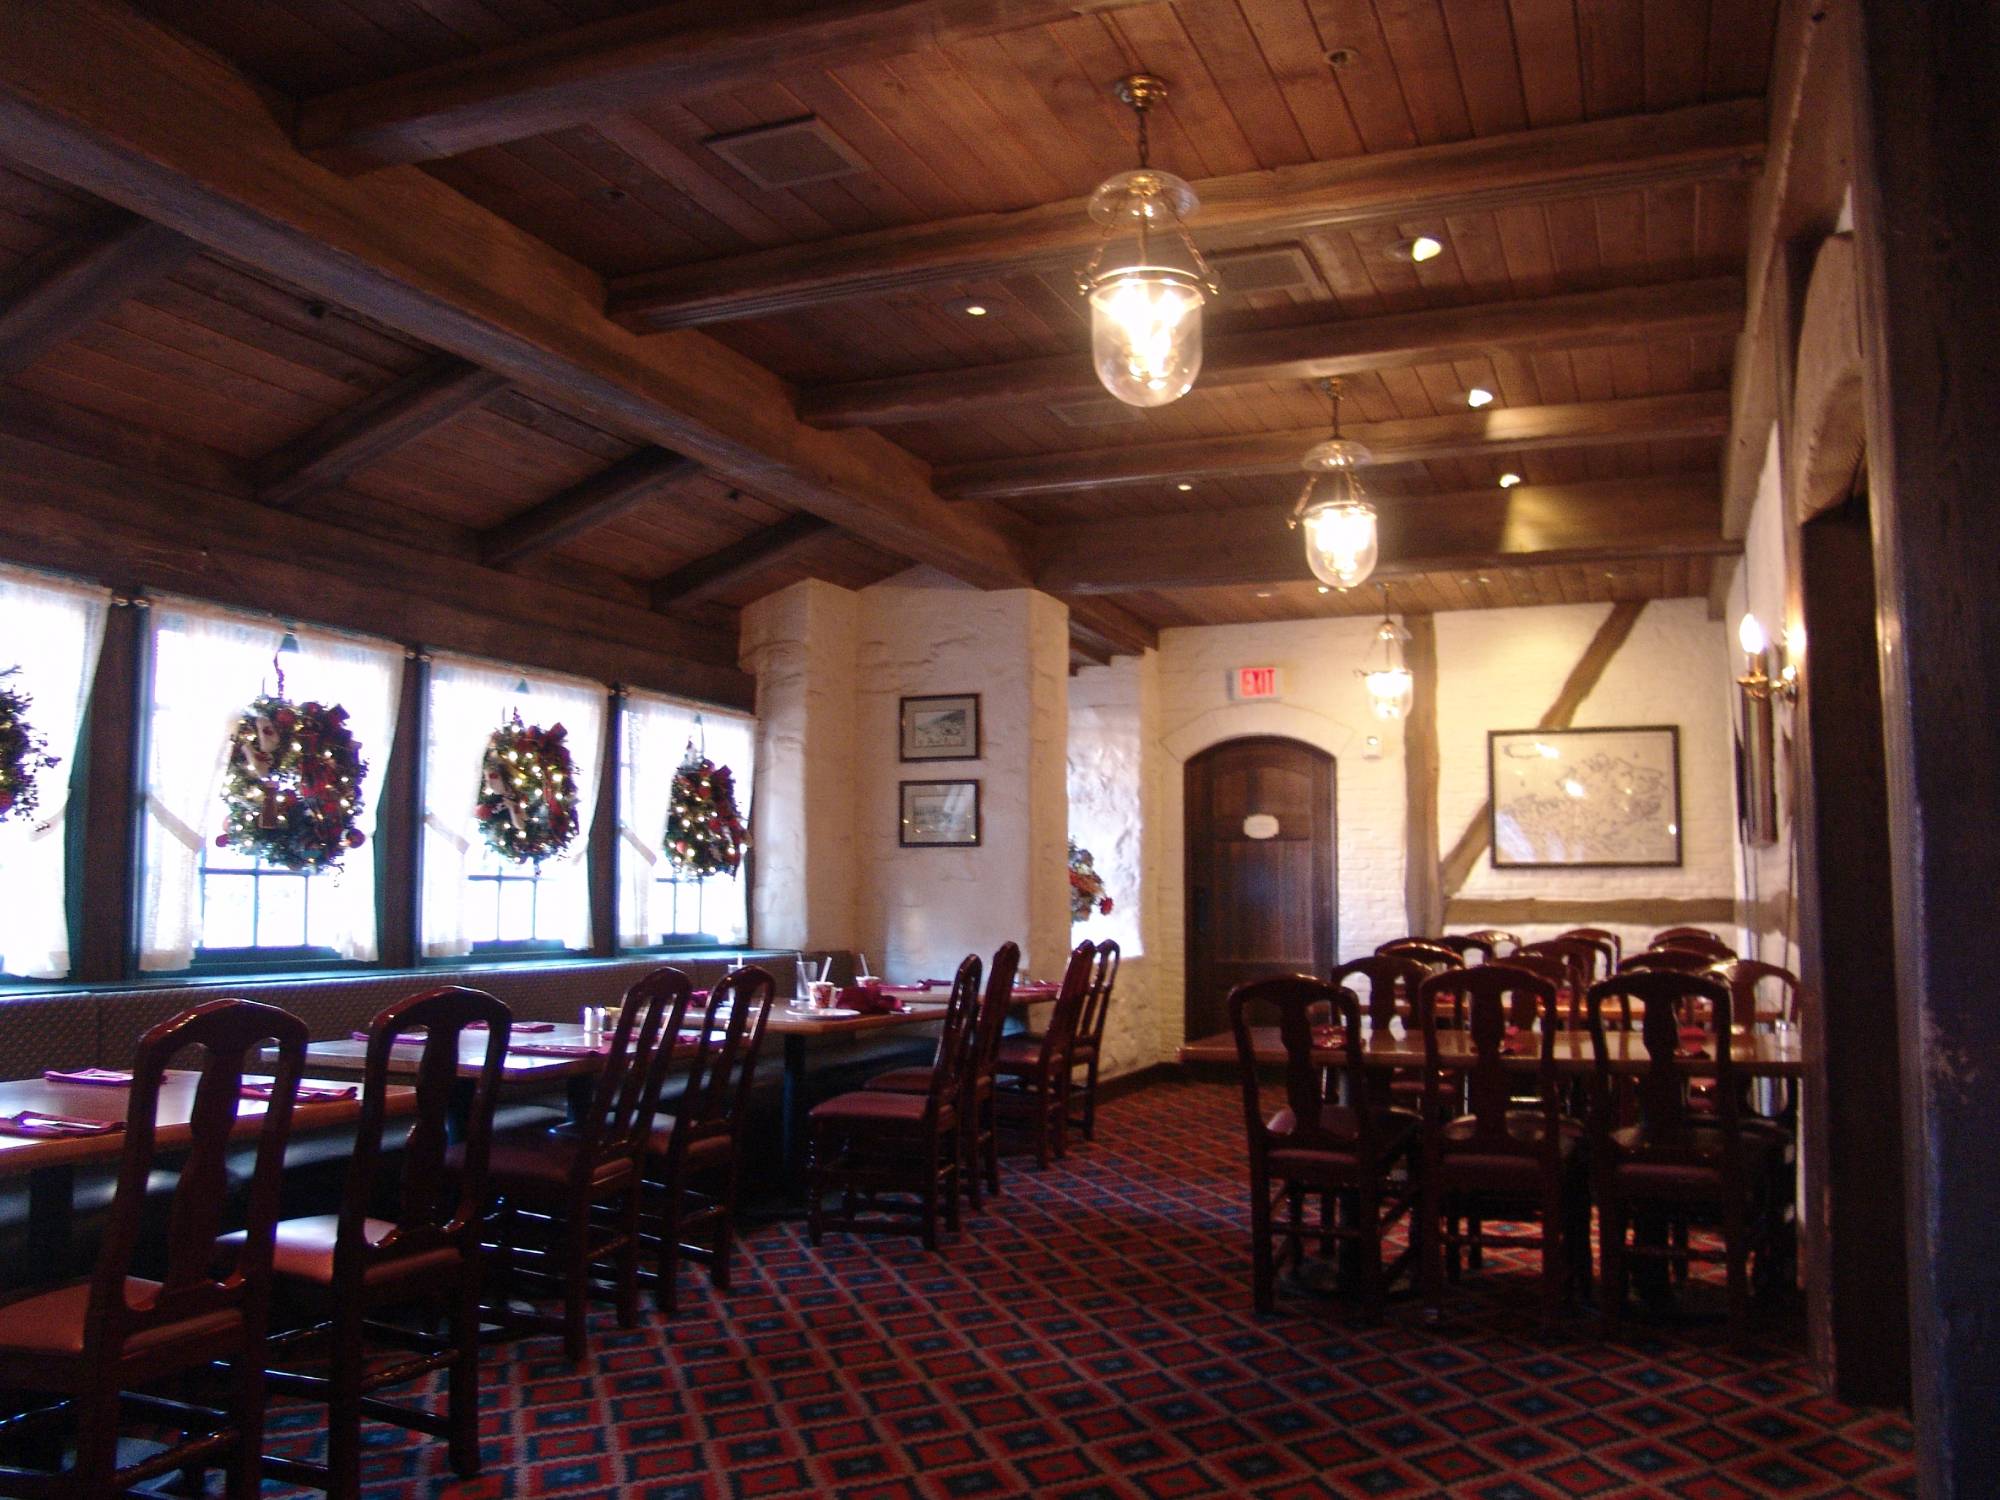 Enjoy breakfast with the Princesses at Akershus in Epcot | PassPorter.com